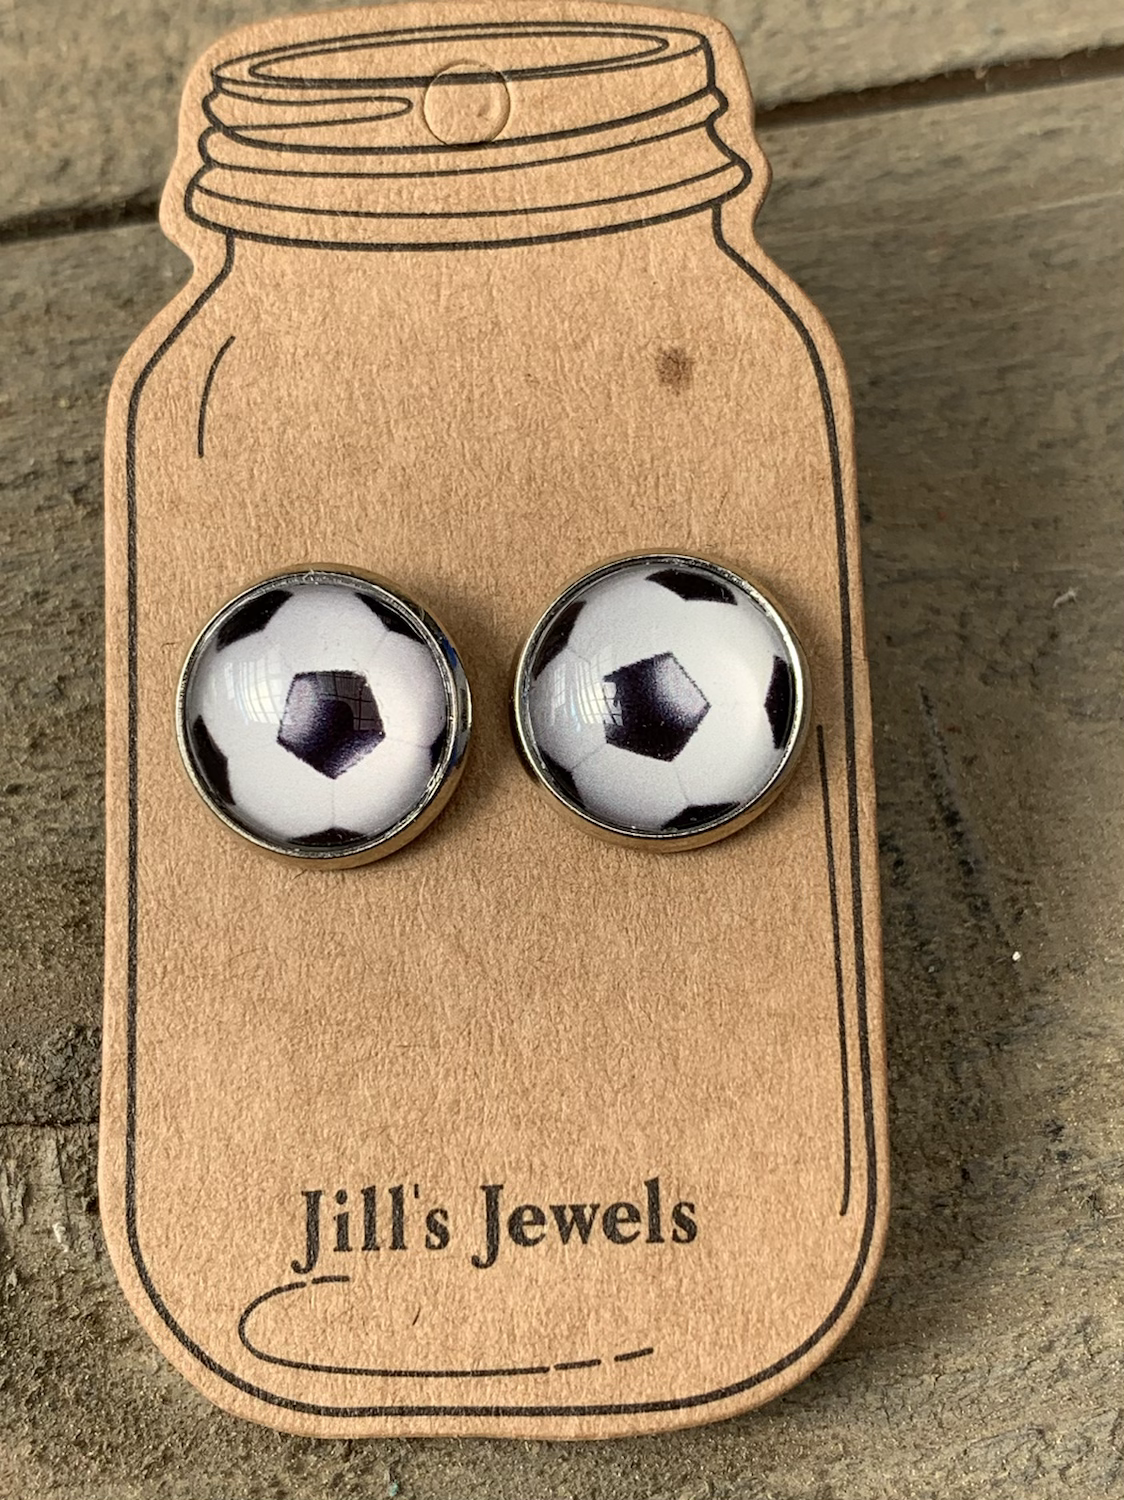 Soccer Stud Earrings - Jill's Jewels | Unique, Handcrafted, Trendy, And Fun Jewelry